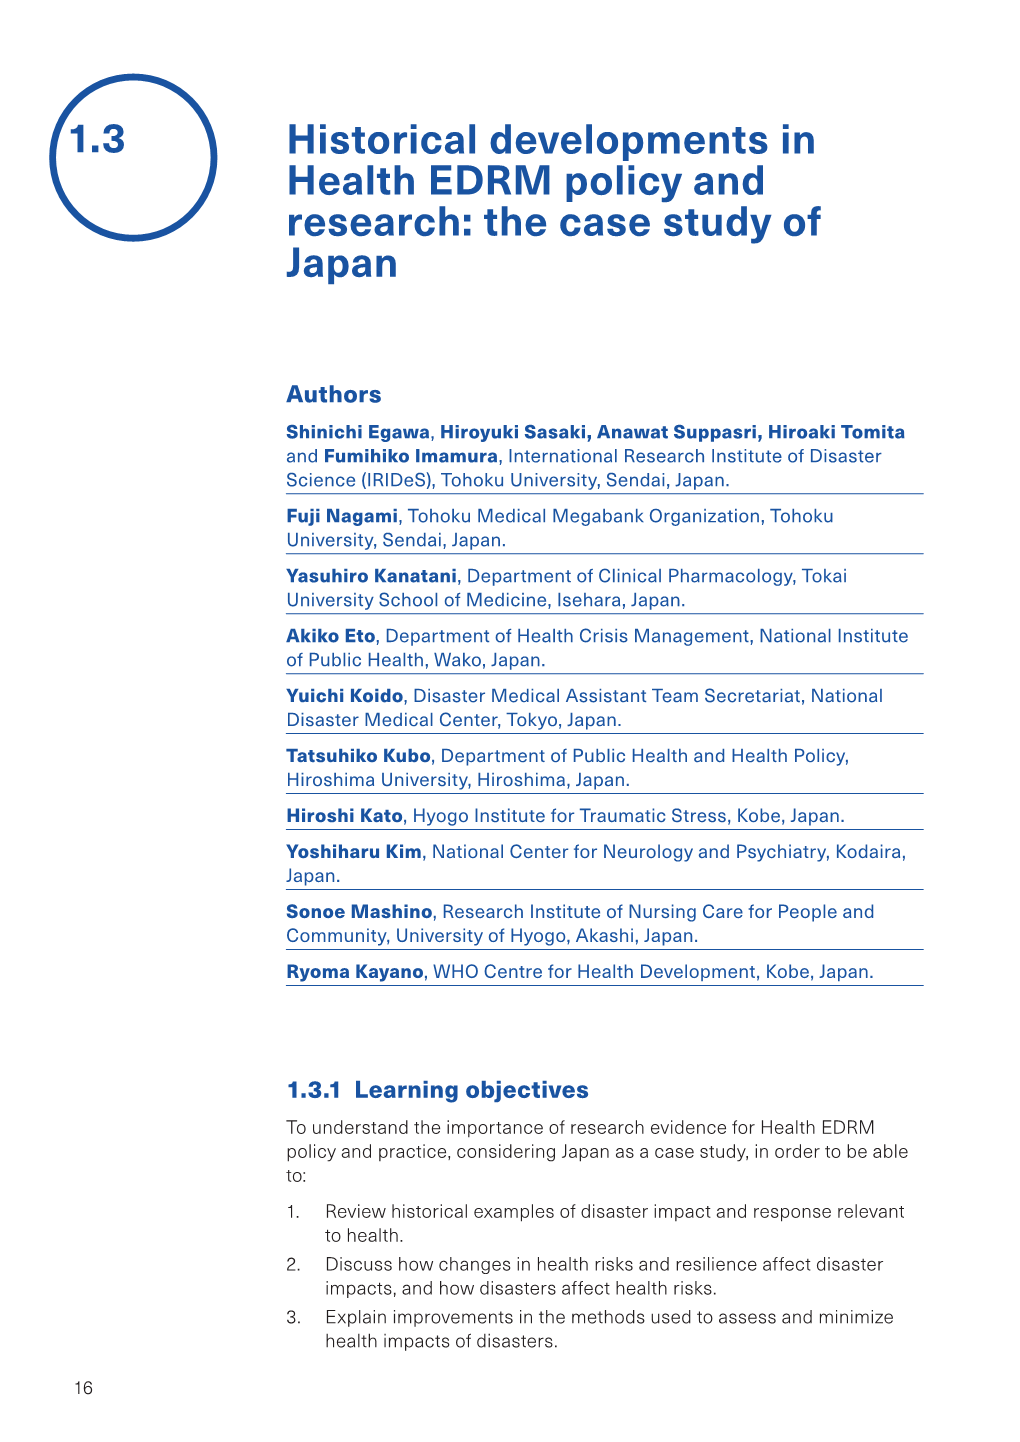 Historical Developments in Health EDRM Policy and Research: the Case Study of Japan